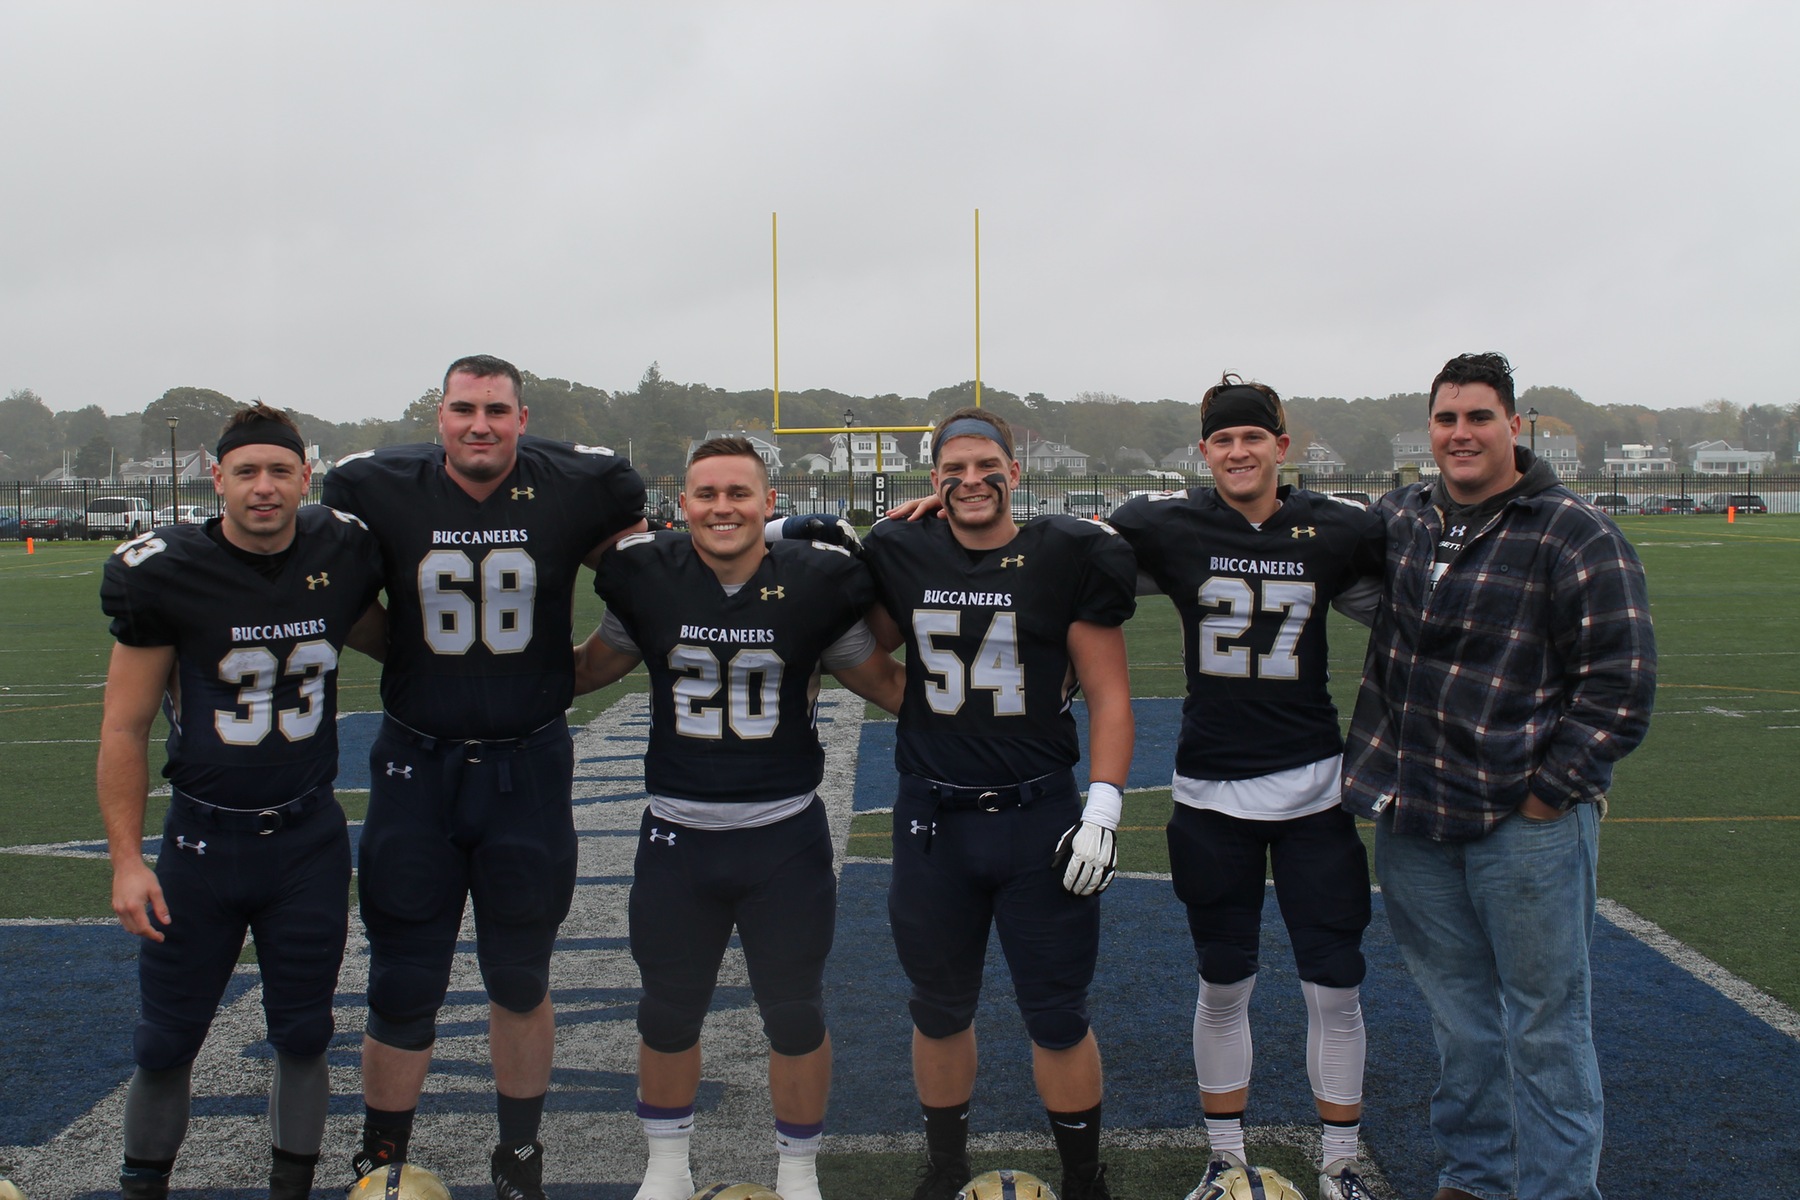 Buccaneers Shutout Lancers in Rain Soaked Buzzards Bay on Senior Day